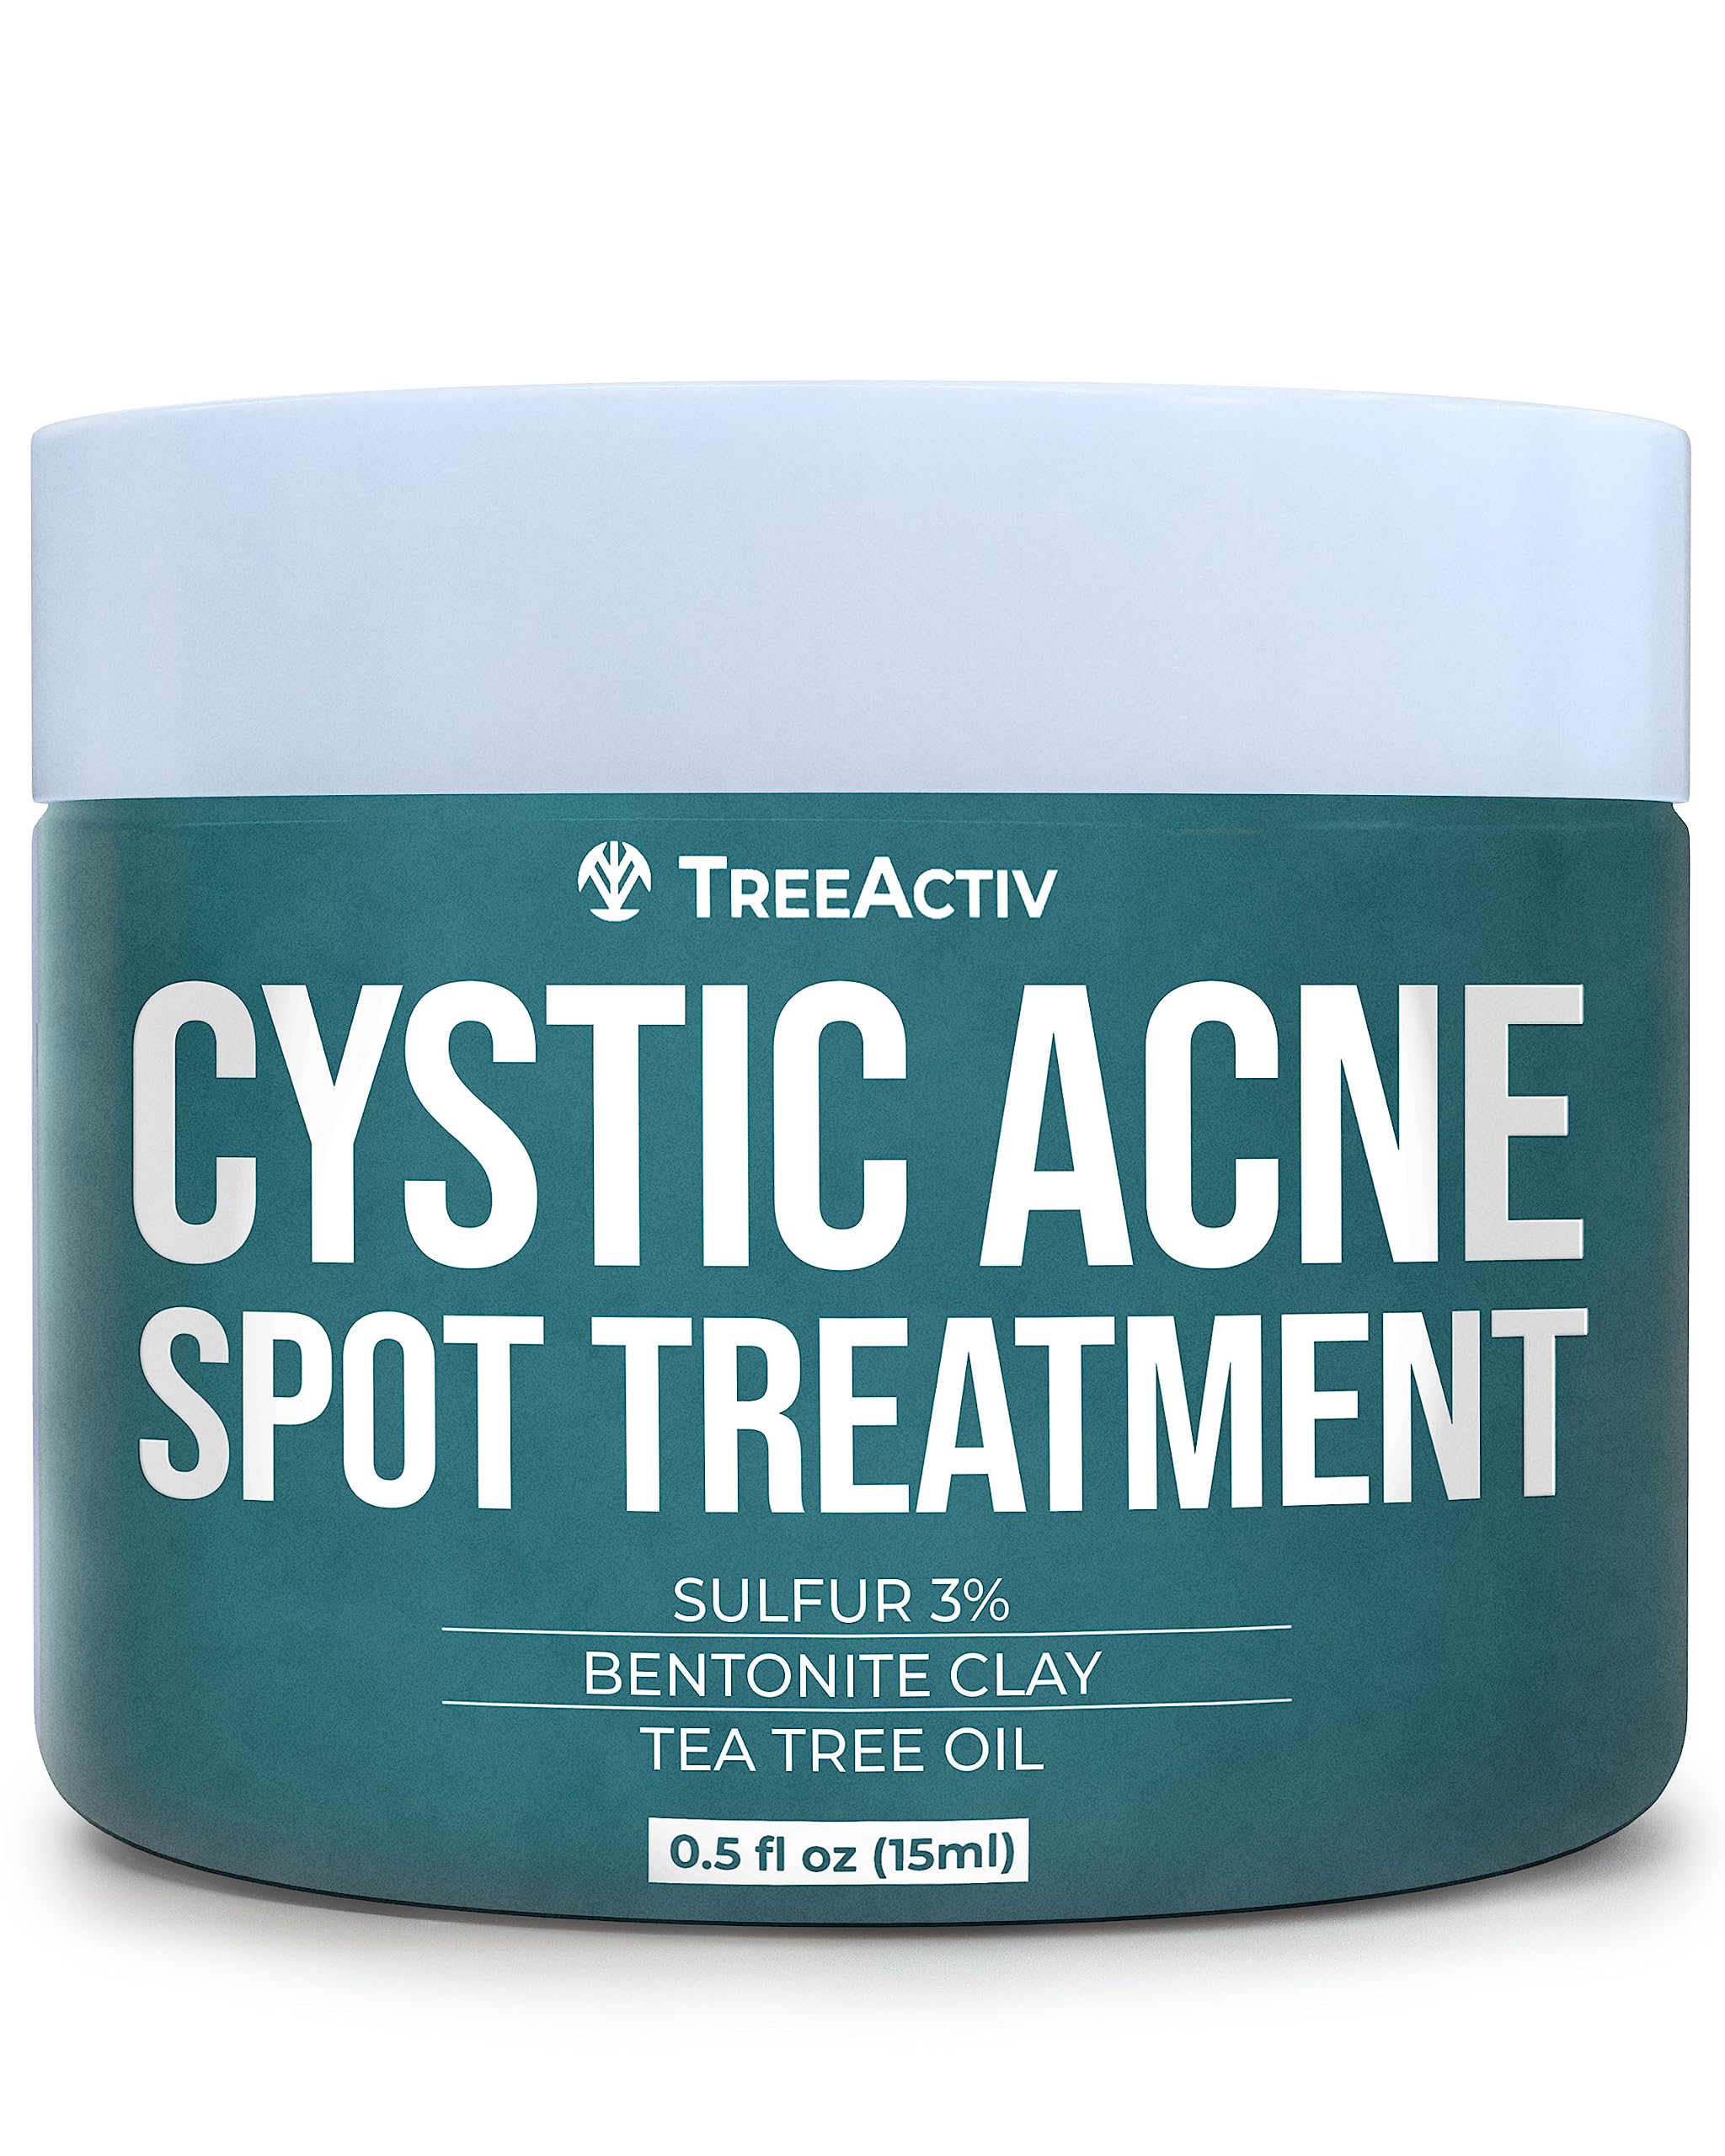 Book Cover TreeActiv Cystic Acne Spot Treatment, Hormonal Acne Treatment & Overnight Sulfur Cystic Acne Treatment For Face, Pimples, and Blemishes for Adults, Men, and Women - 0.5oz 120+ Uses